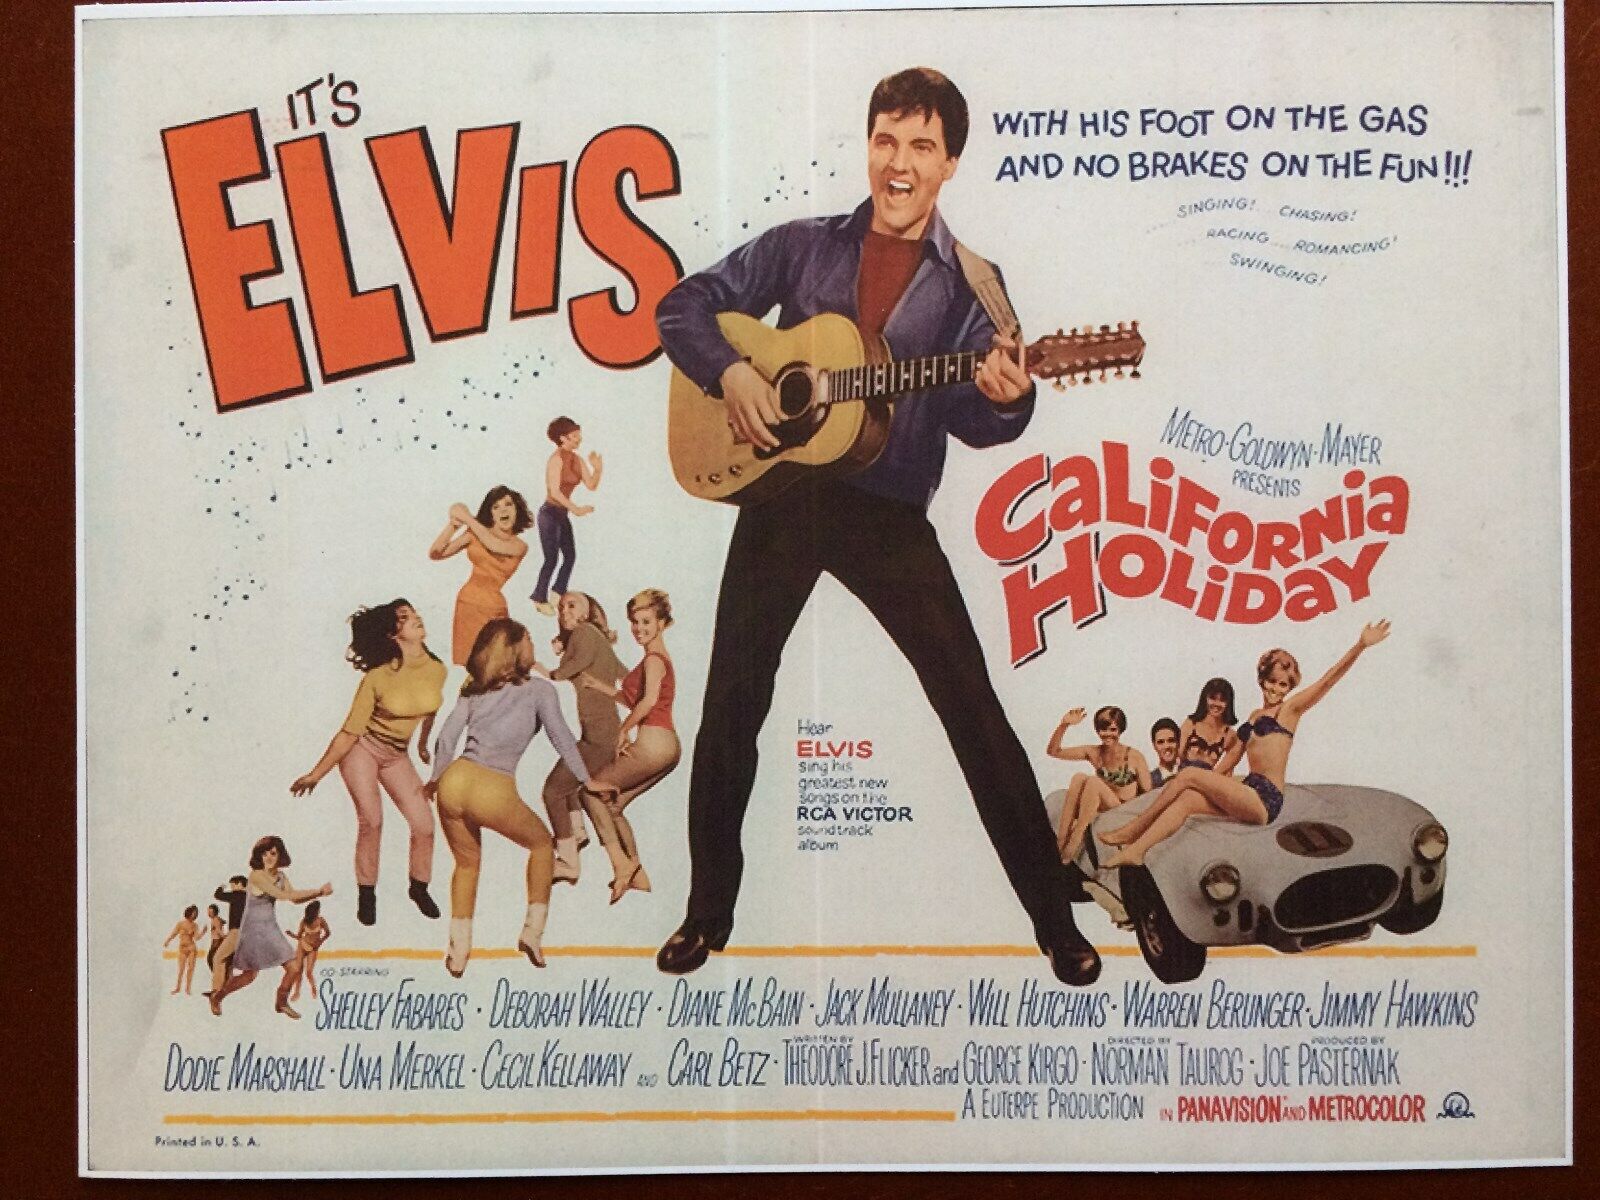 ELVIS IN Excellence SPINOUT HOLIDAY.TITLE CARD.REPRODUCTION.1966 CALIFORNIA Limited Special Price